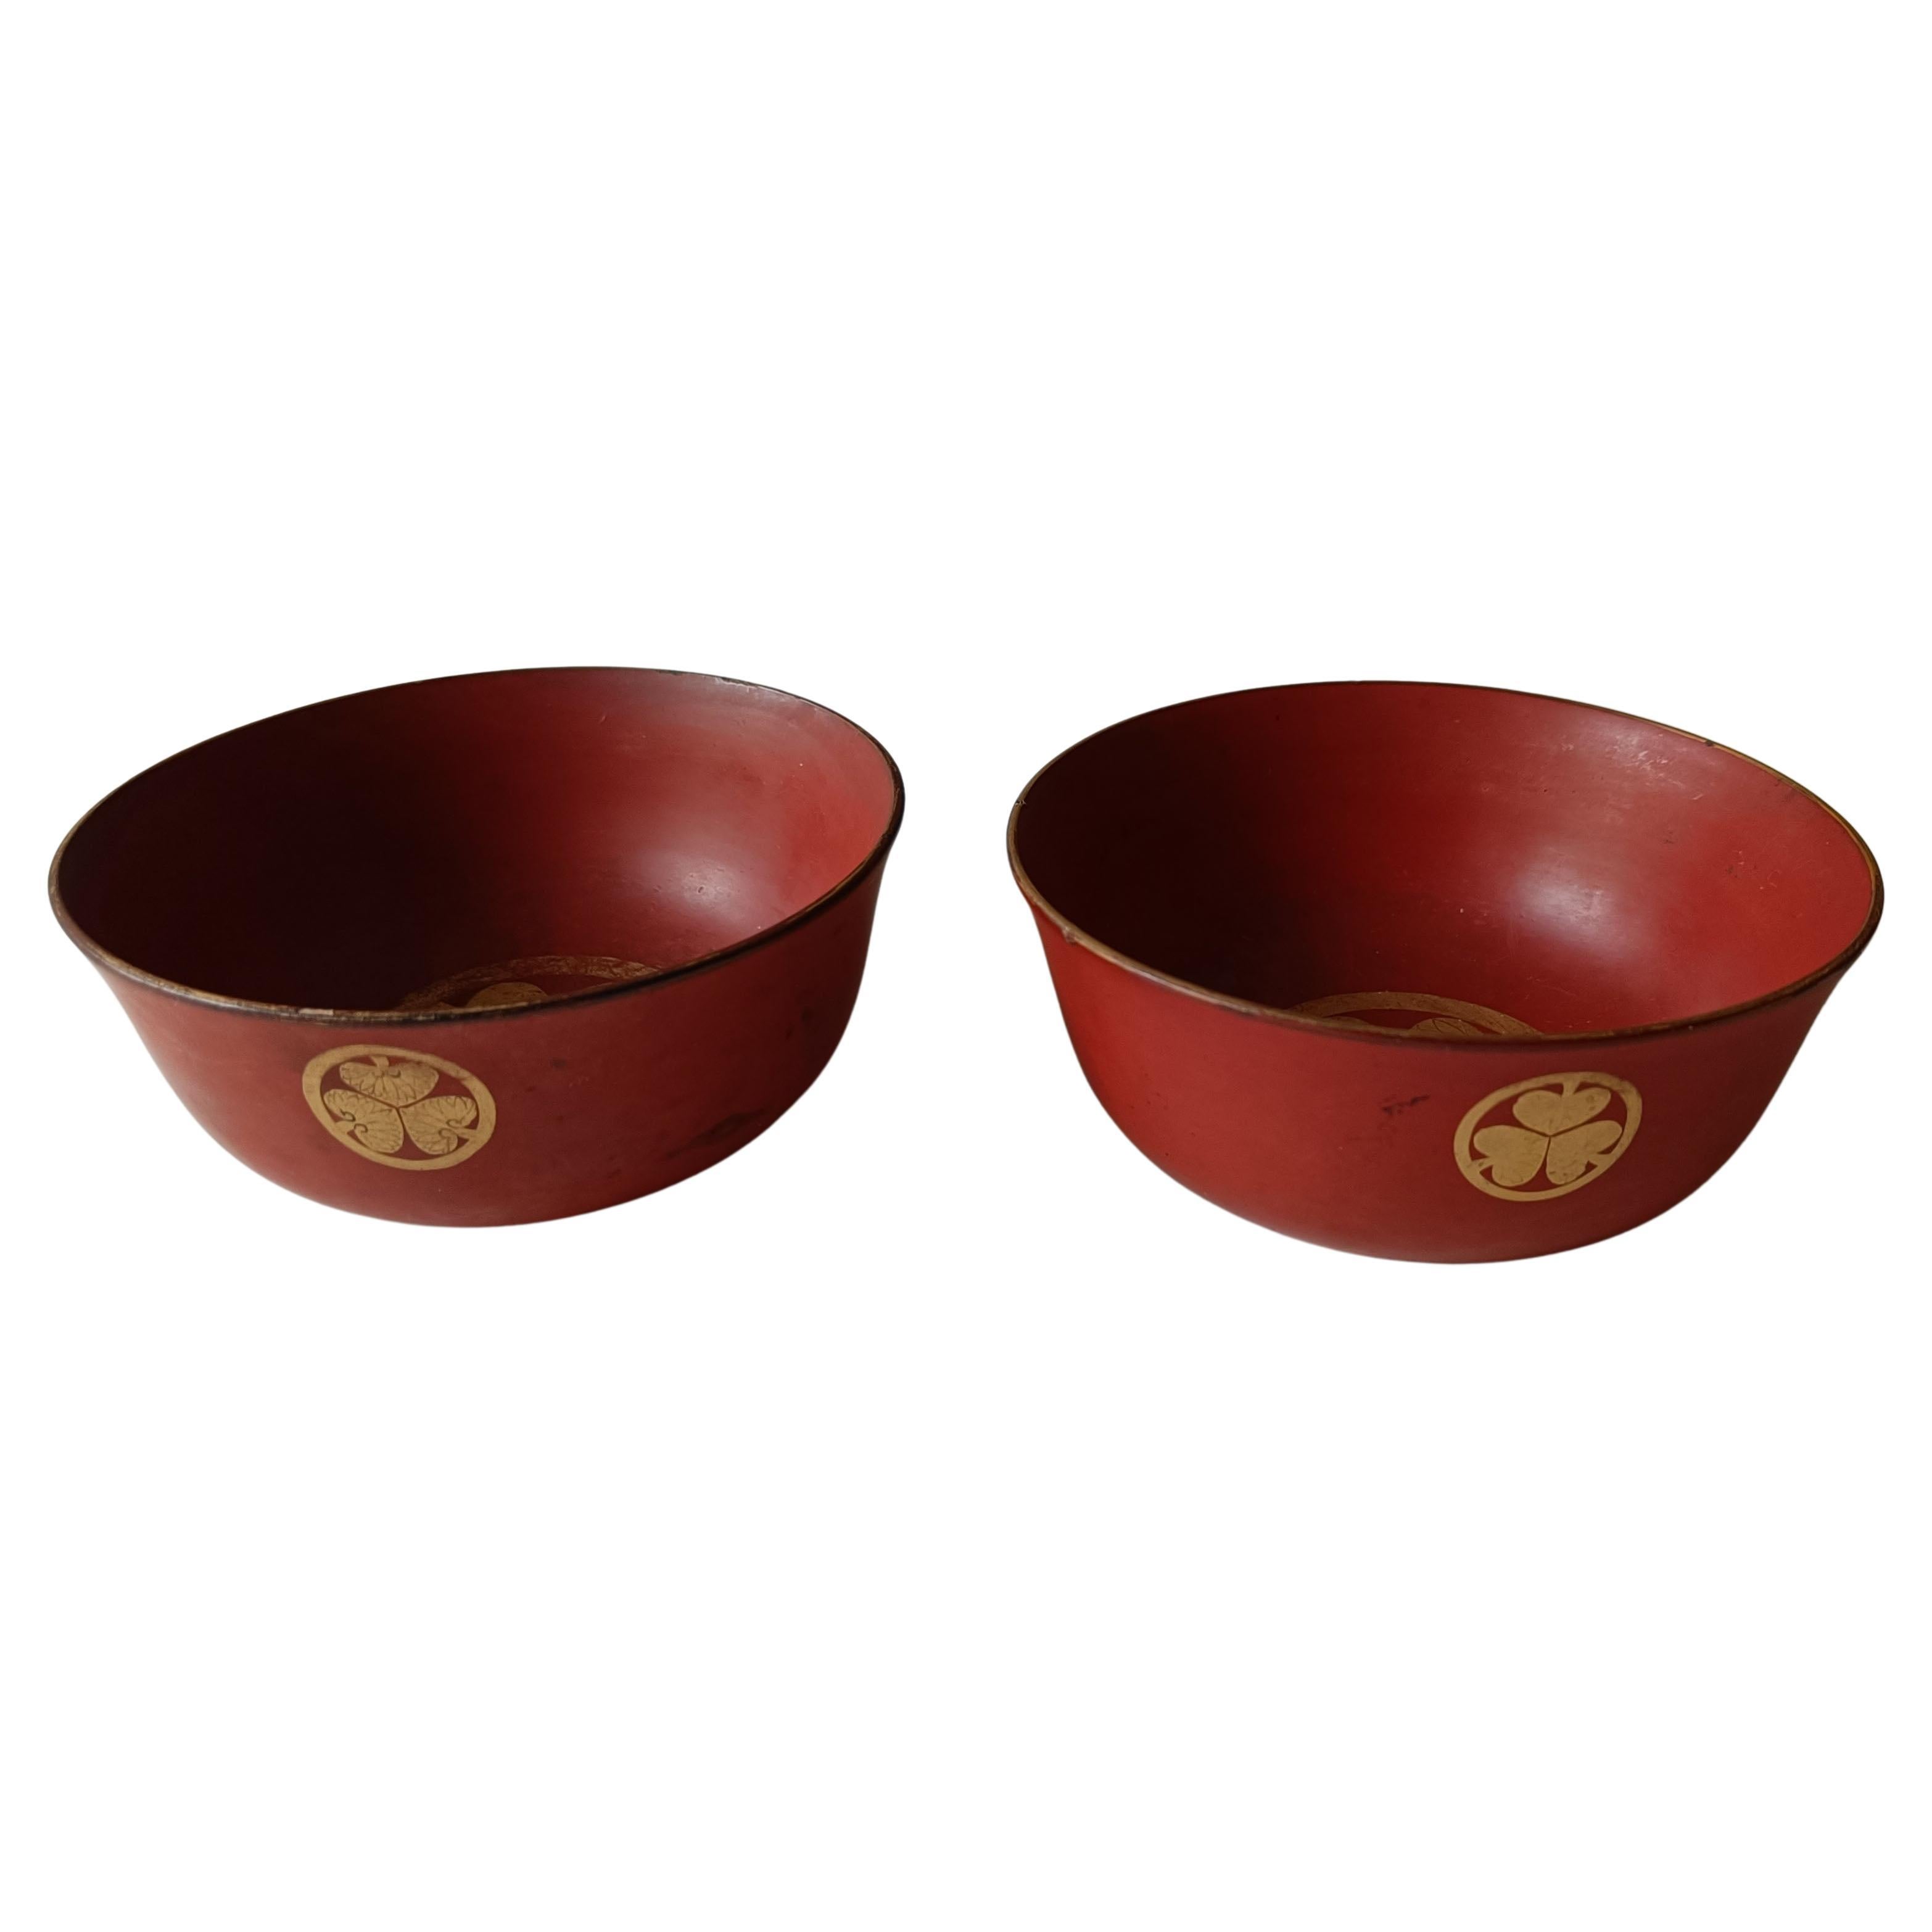 Japanese Lacquered Wood Bowls 19th Century Asian Antiques 中国古董